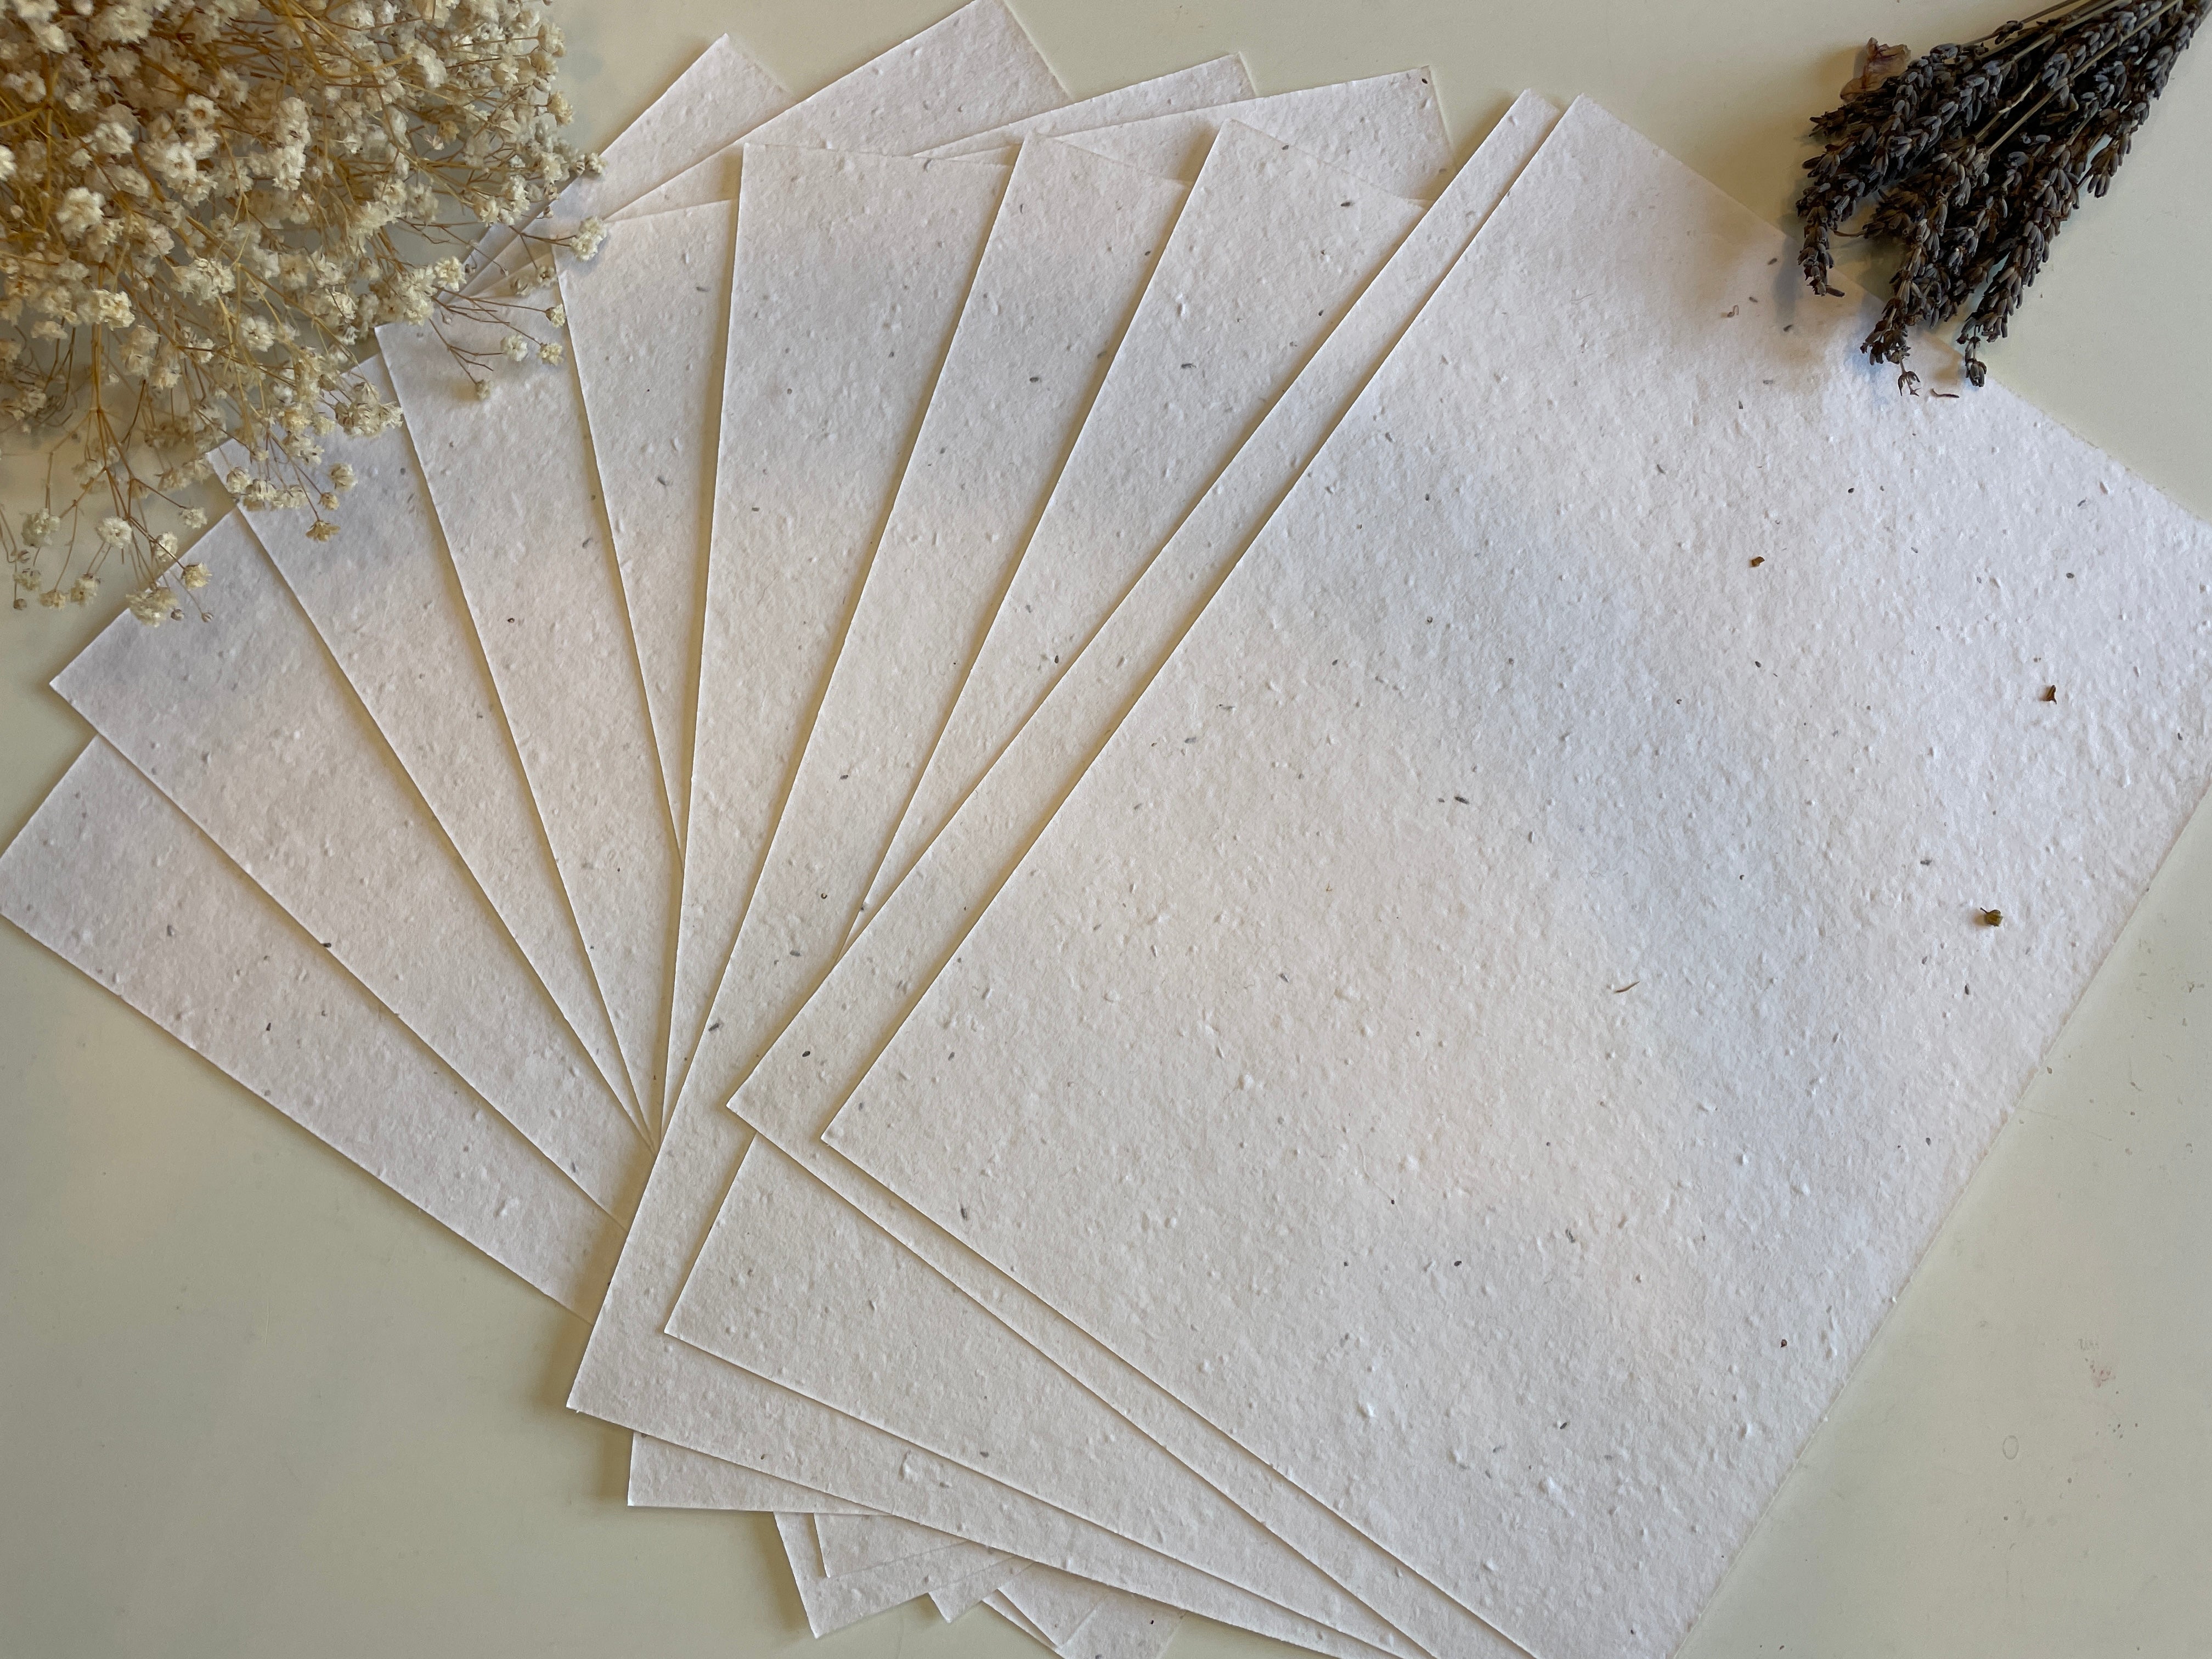 Wholesale Seeded Paper Wildflower / Card Plain - Eco Friendly Print at Home Craft Paper with Wildflower Seed Mix